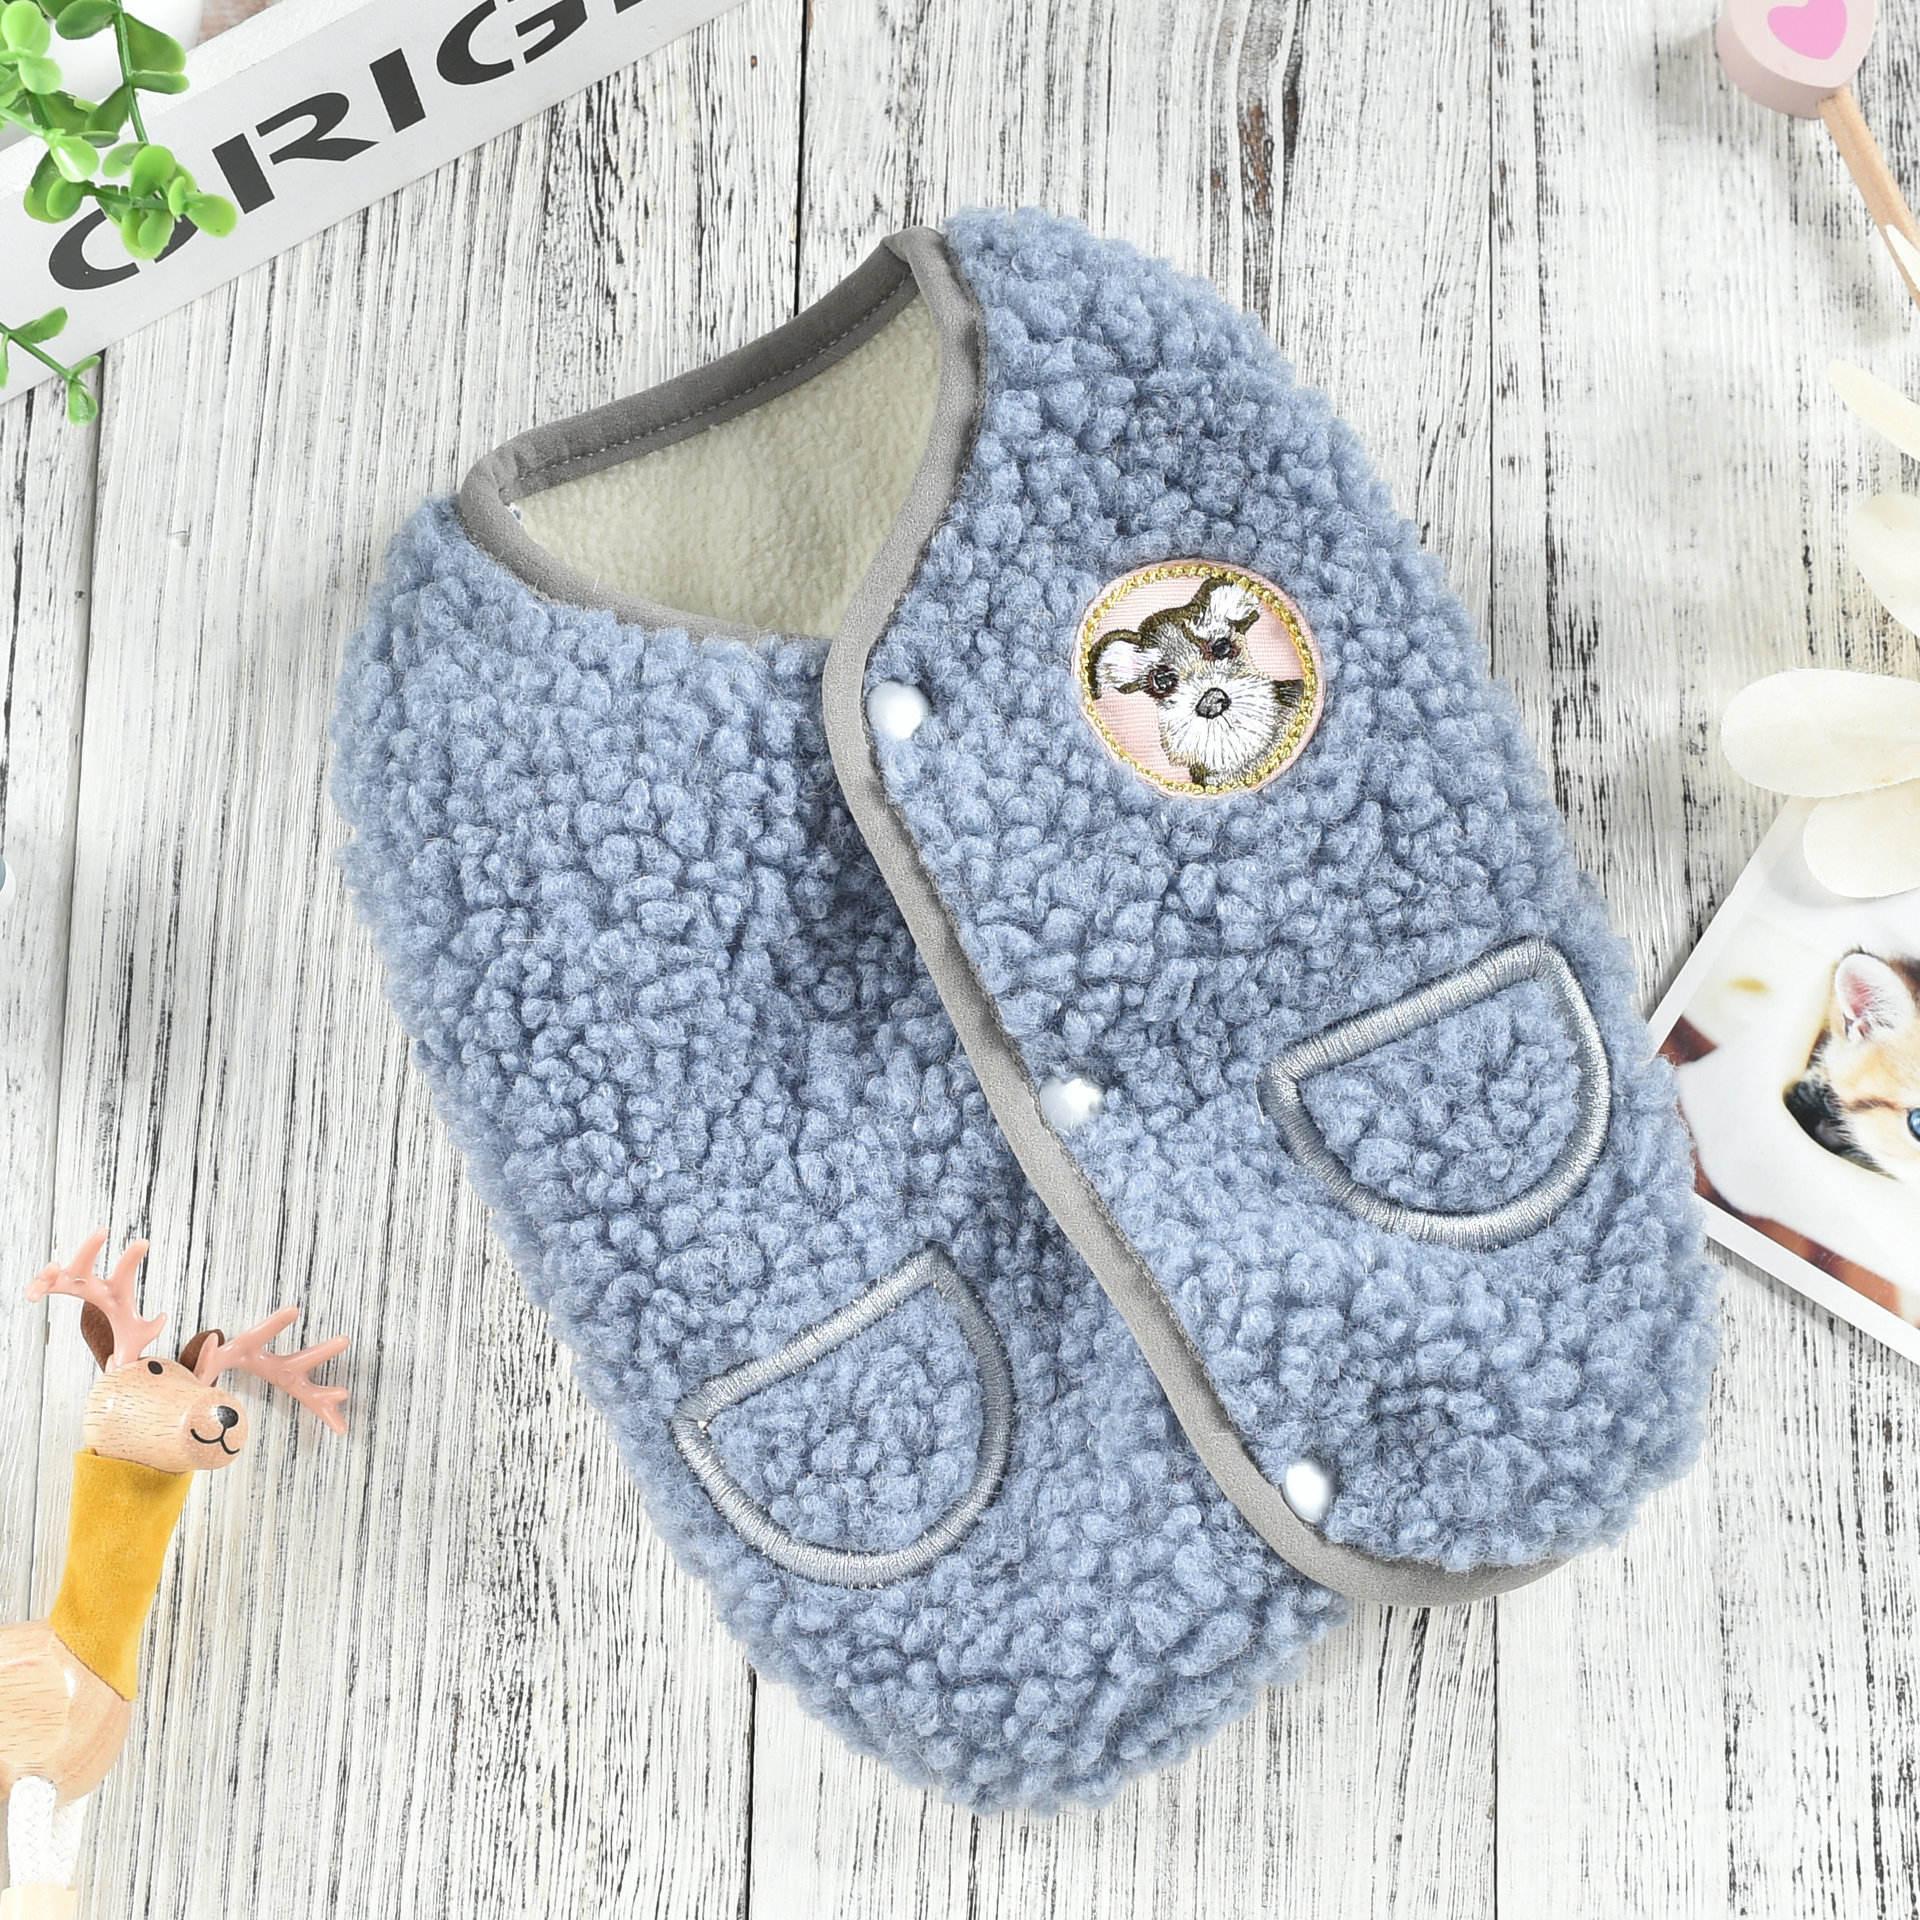 New Style Puppy Cloth Custom Warm Dog Clothes For Fleece Vest For Wholesale